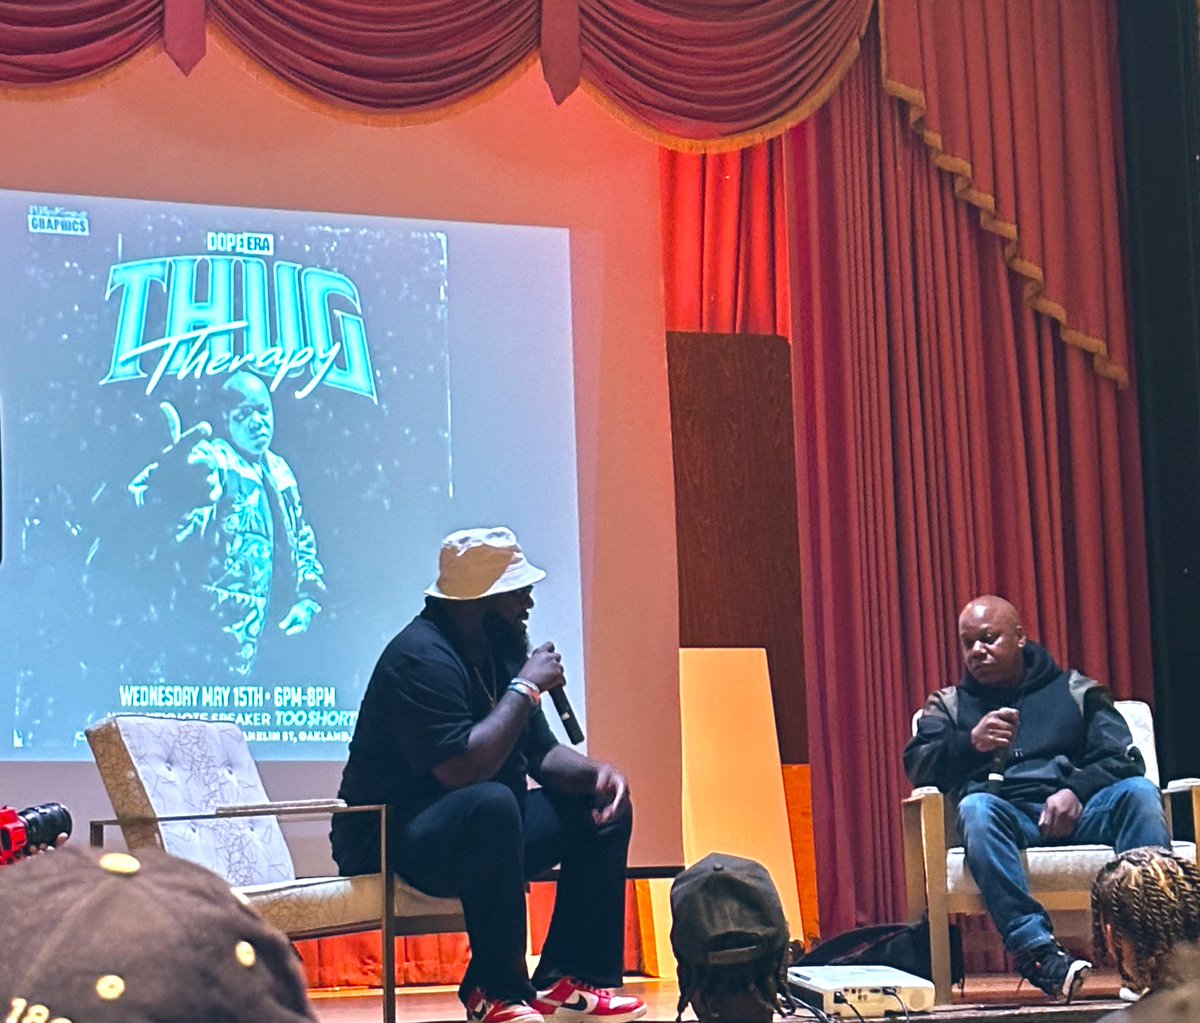 #ThugTherapy wit @MistahFAB & @TooShort in convo bout purpose! #TownBiz #Oakland #Healing